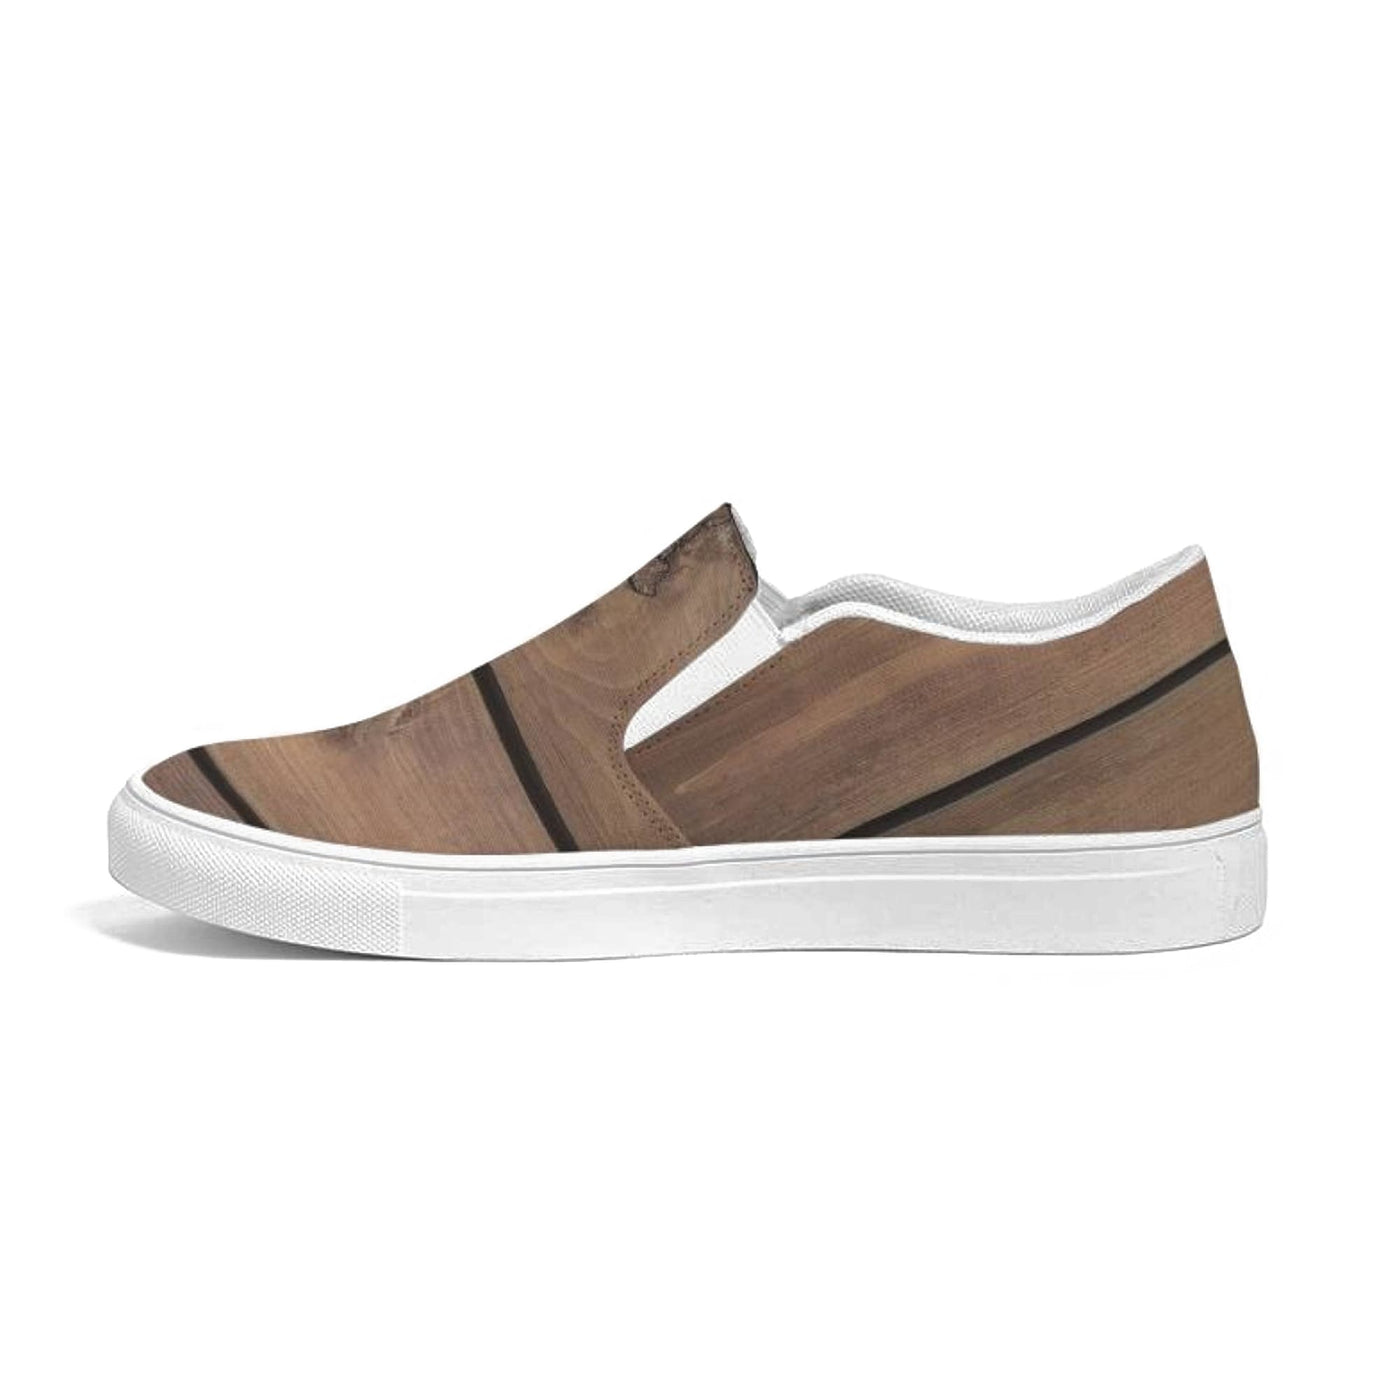 Womens Sneakers - Canvas Slip On Shoes Brown Plank Print